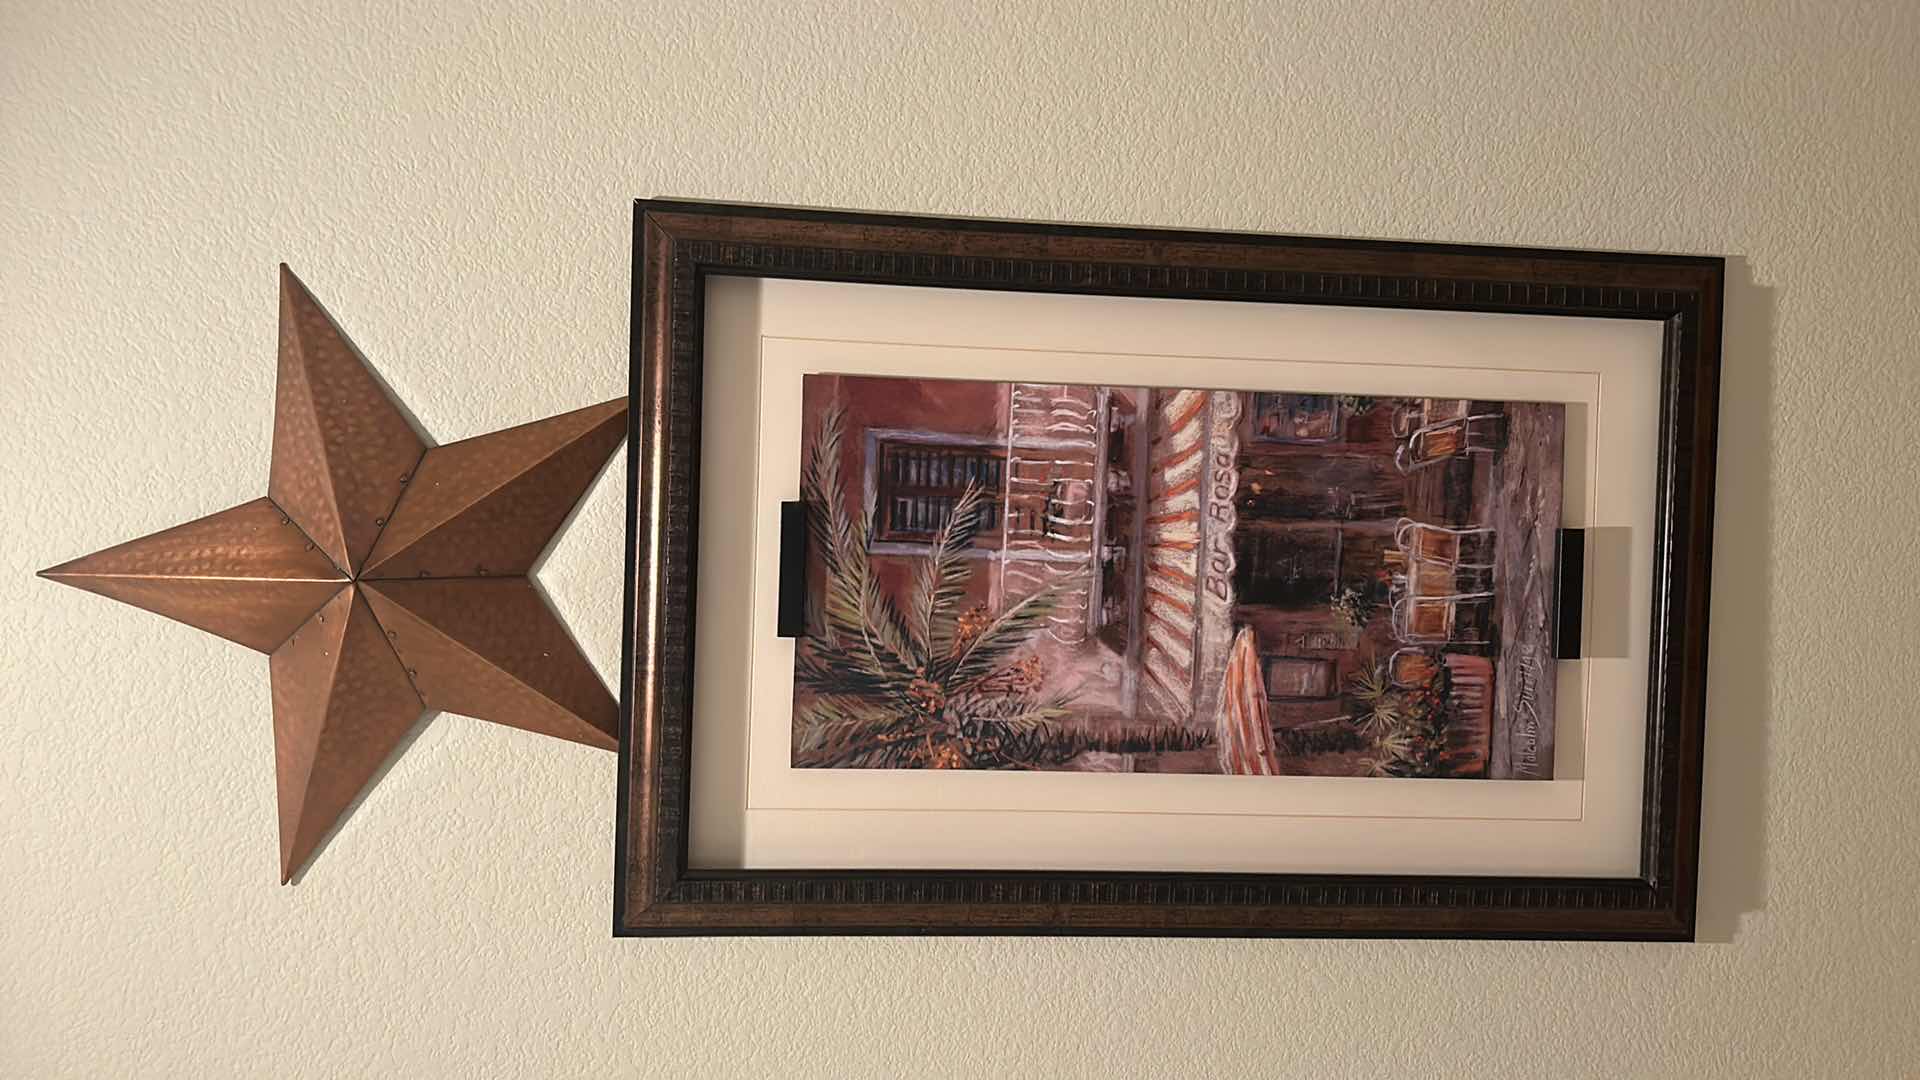 Photo 5 of FRAMED BISTRO ARTWORK 21 1/2” x 34” AND STAR WALL DECOR18 x 18”